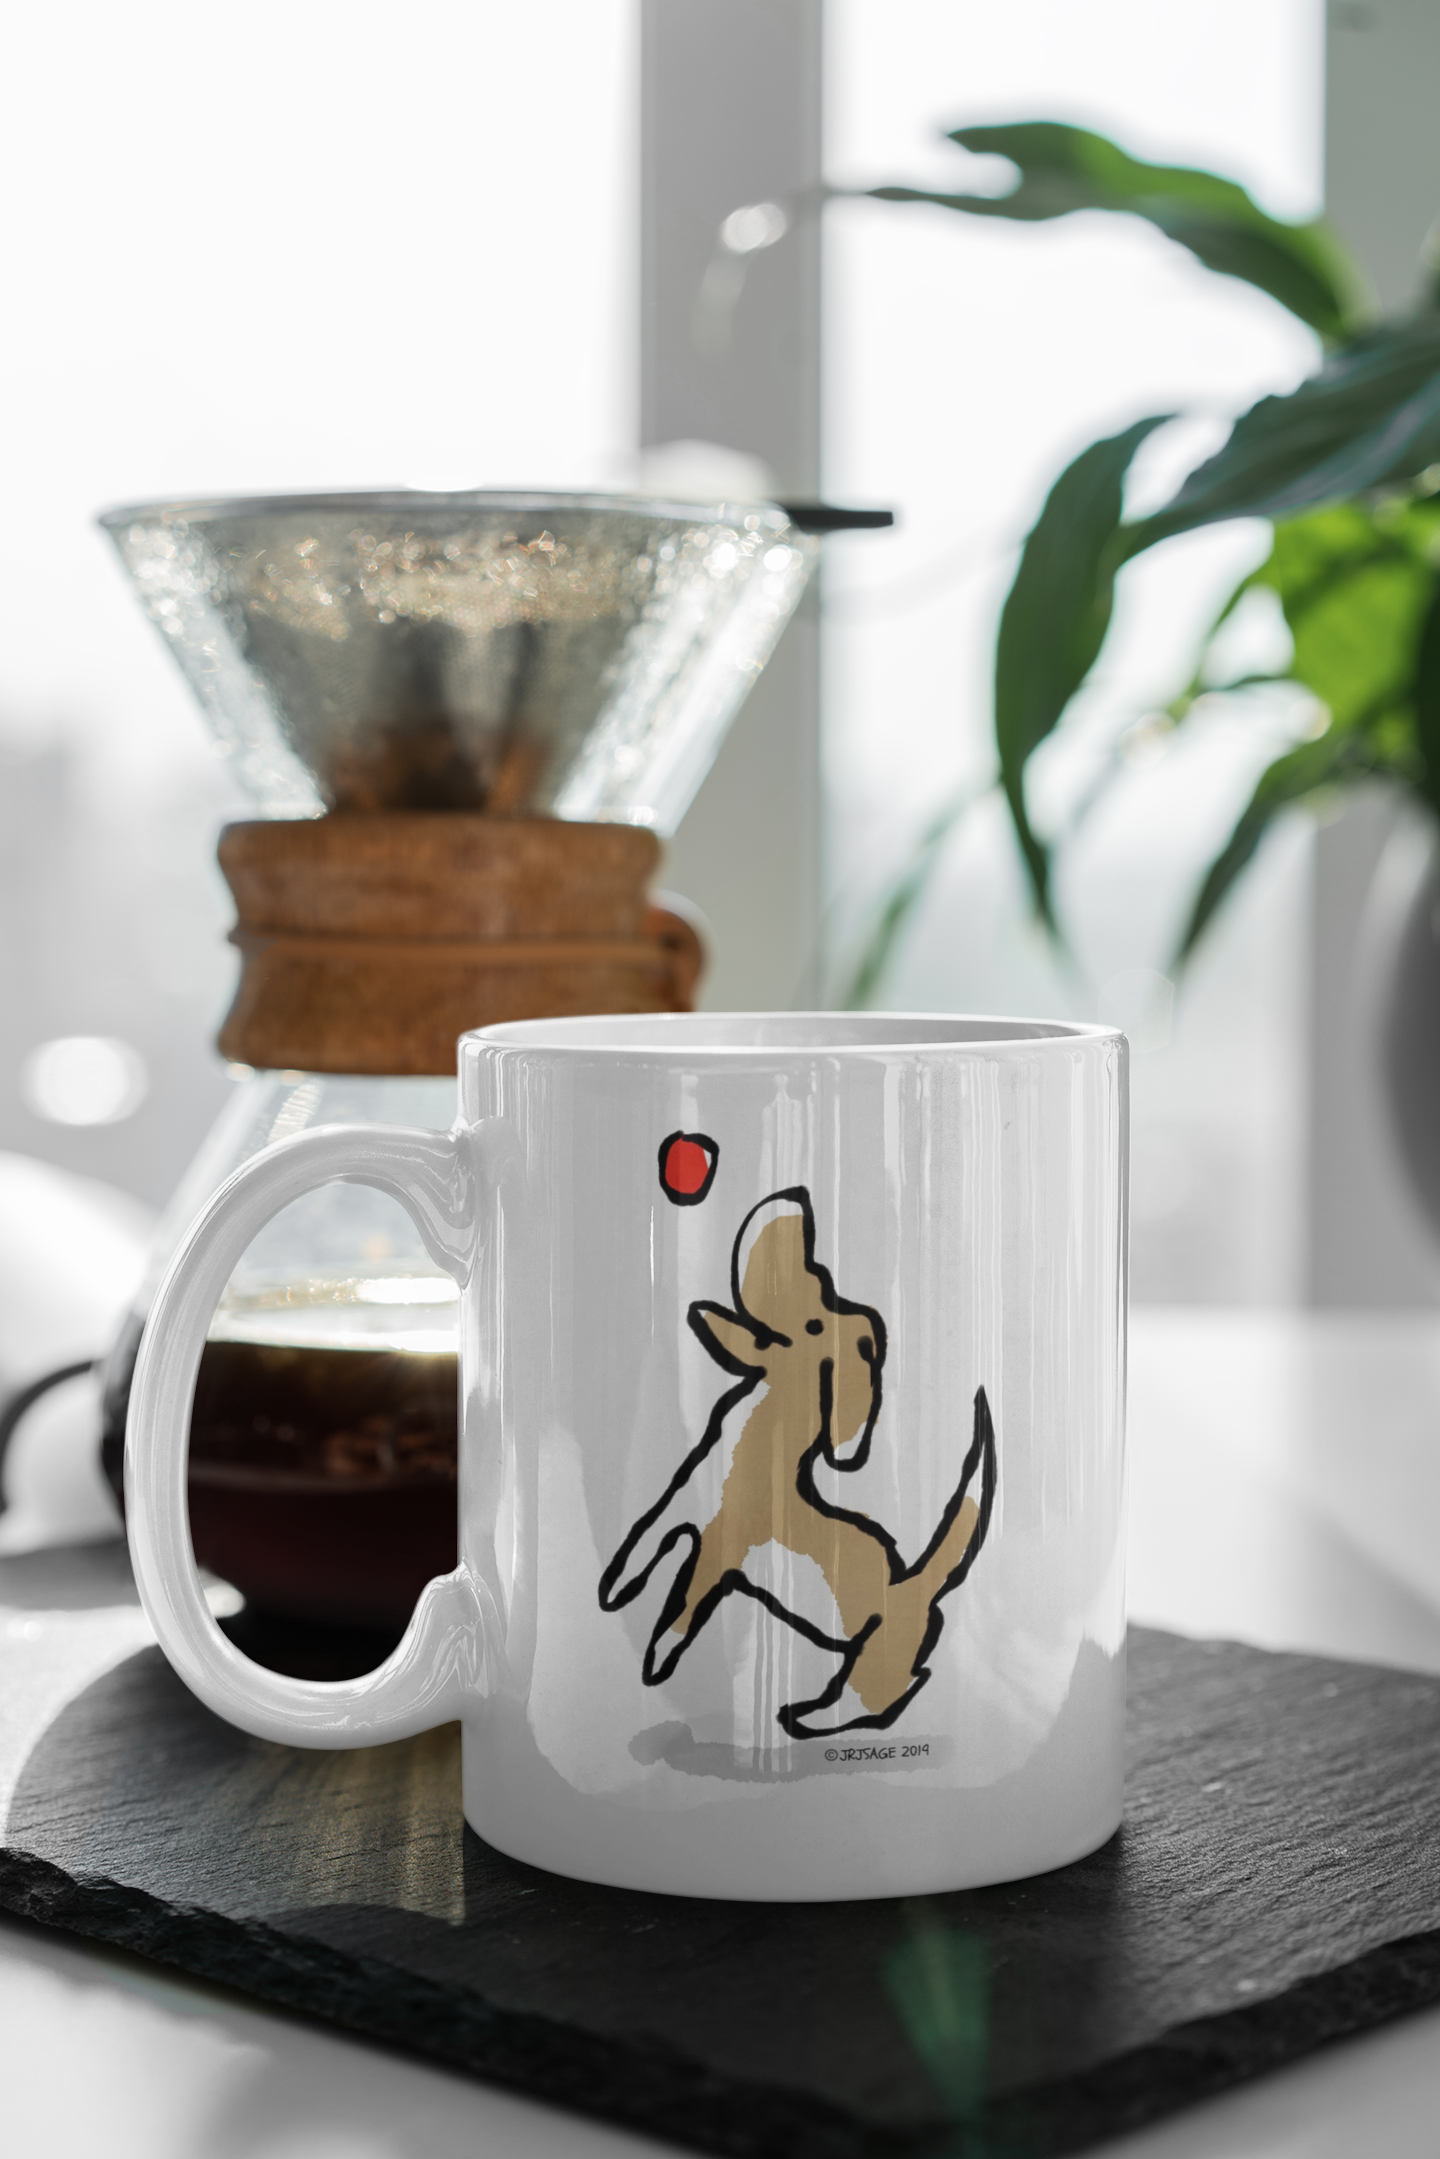 Jumping Dog mug puppy with ball illustration by Hector and Bone on a table